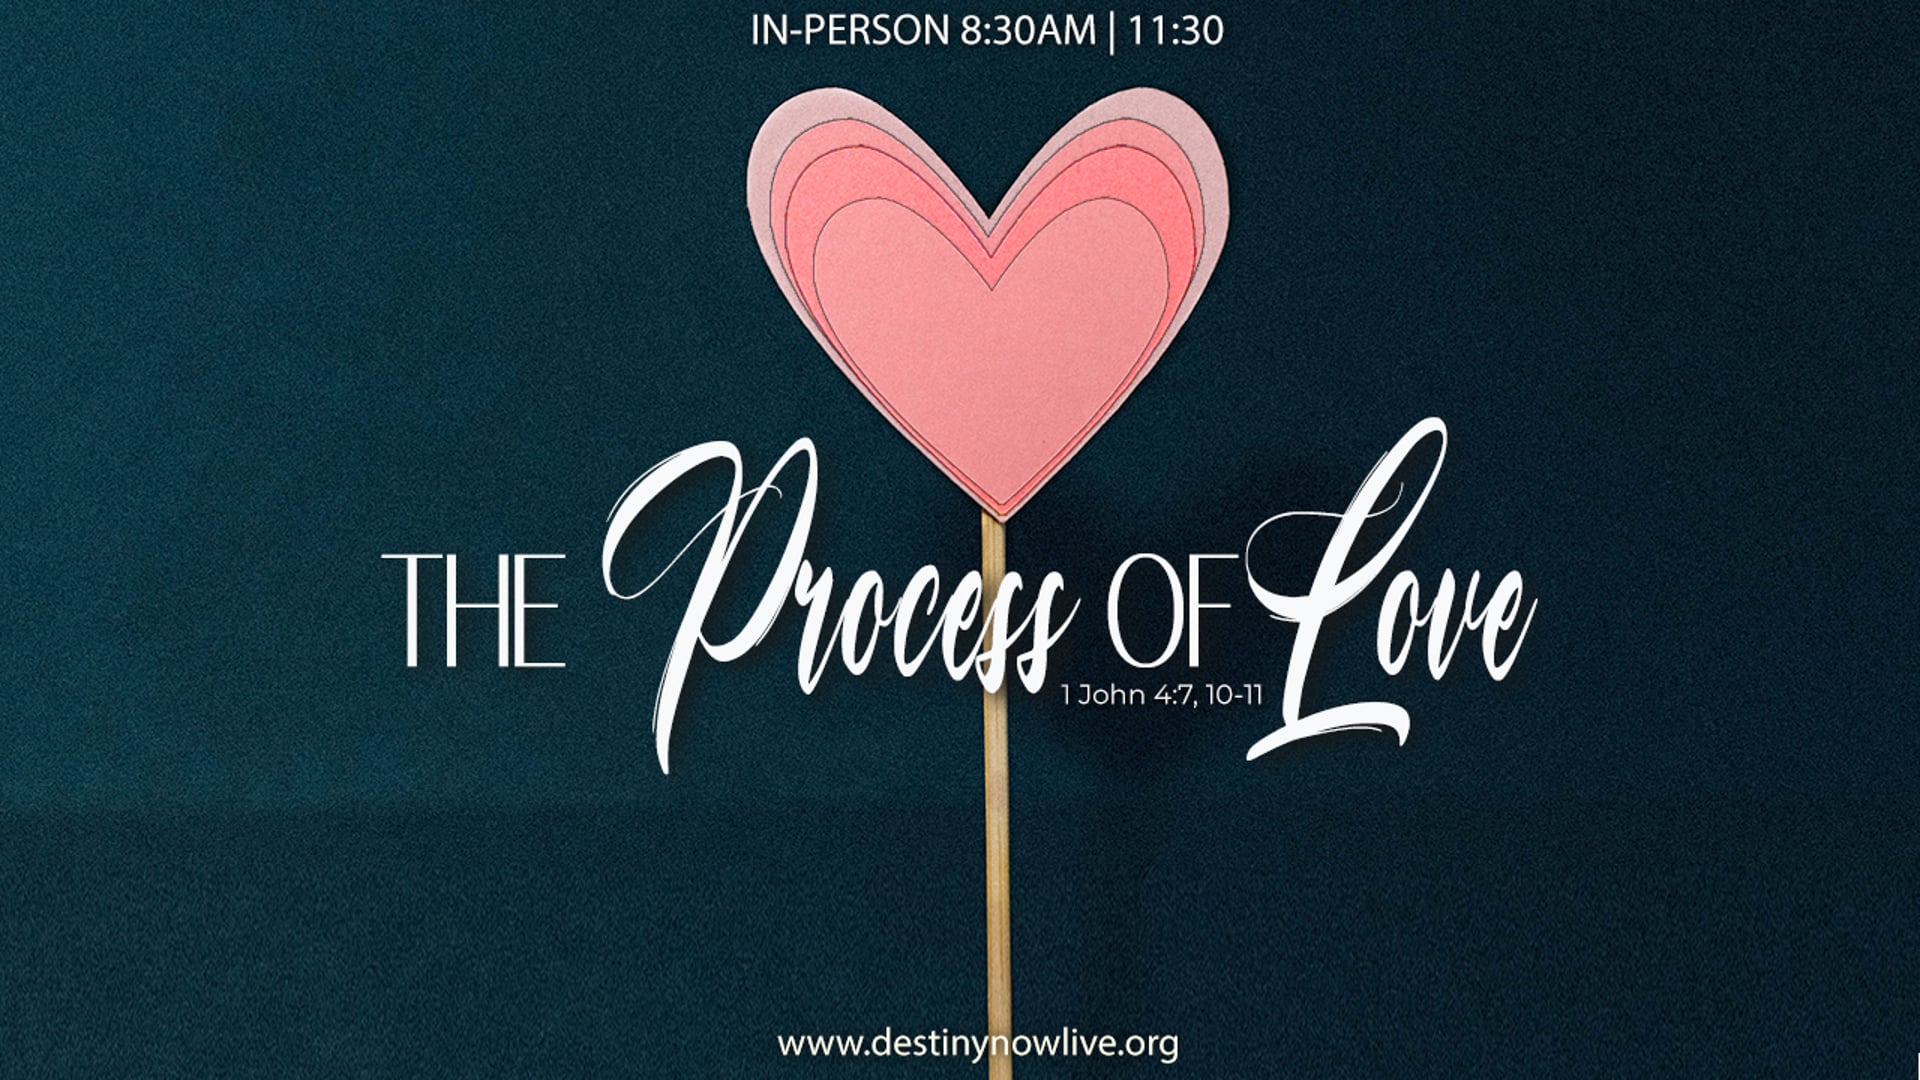 "The Process of Love" - Online Giving: Text to Give - 910-460-3377 - Give Online @ www.destinynow.org